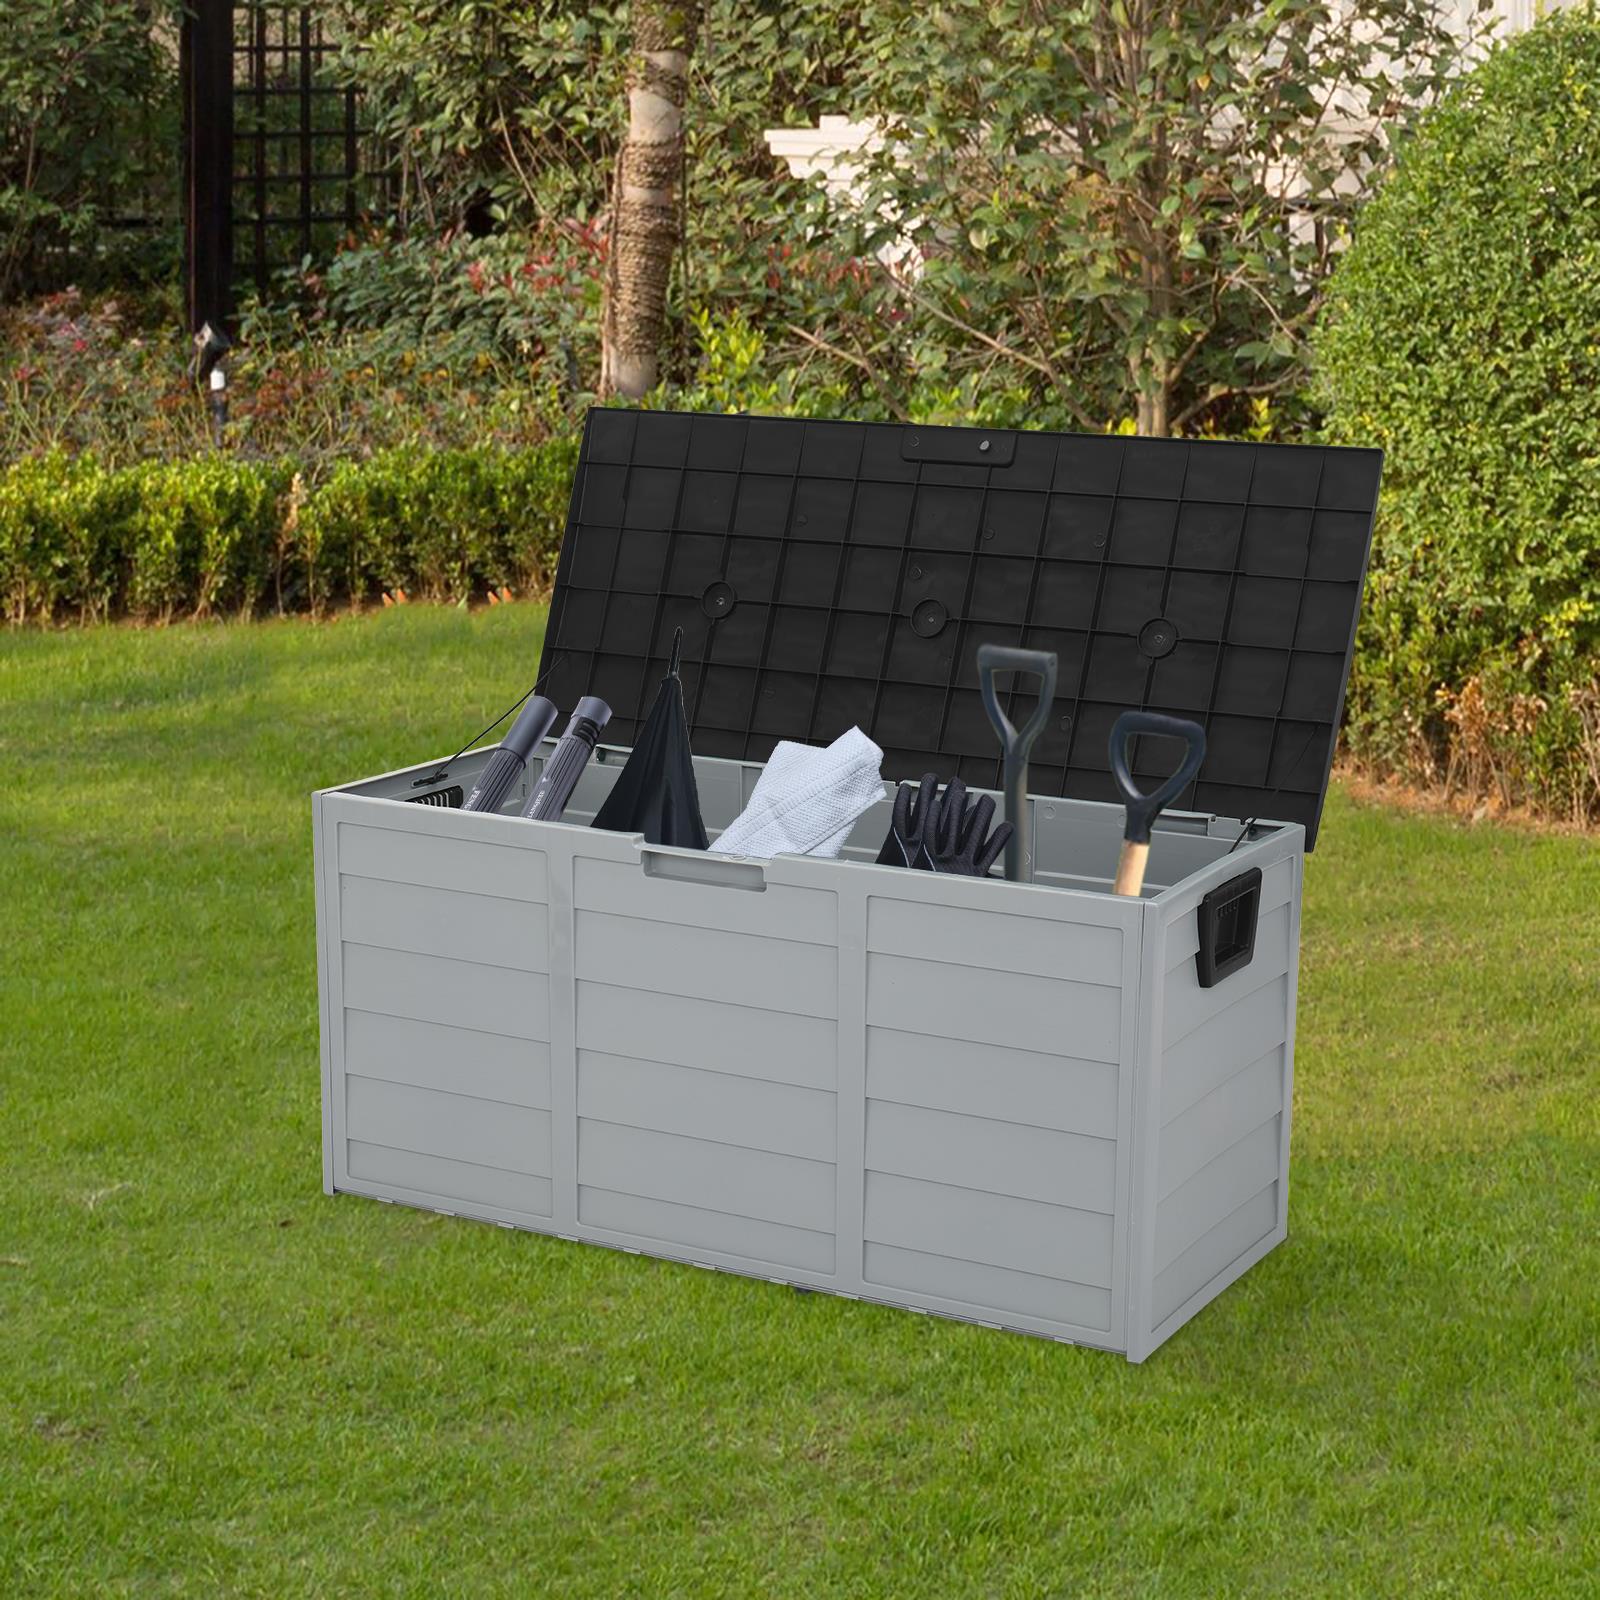 Great Deals 75gal 260L Outdoor Garden Plastic Storage Deck Box Chest Tools Cushions Toys Lockable Seat